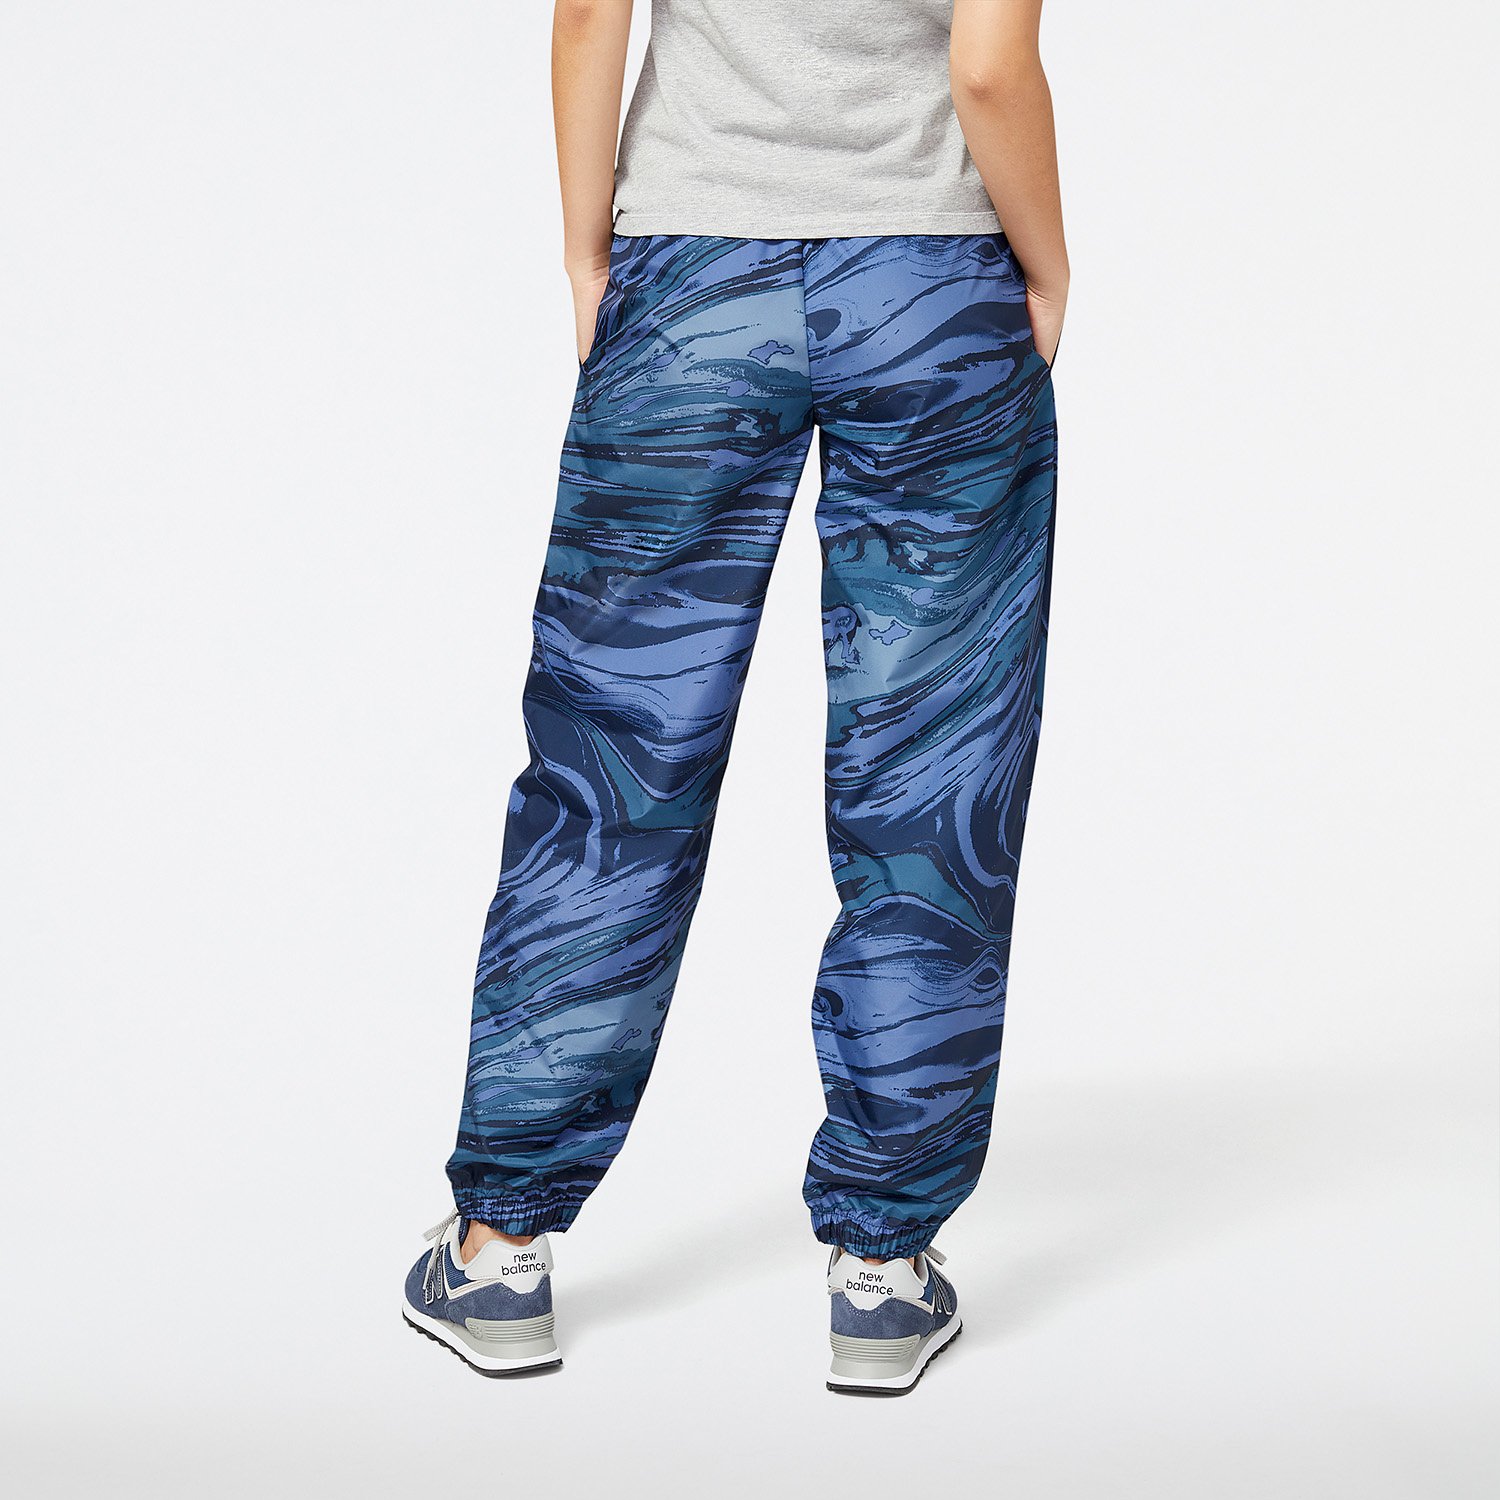 New Balance Unissentials French Terry Pants  Rebel Sport